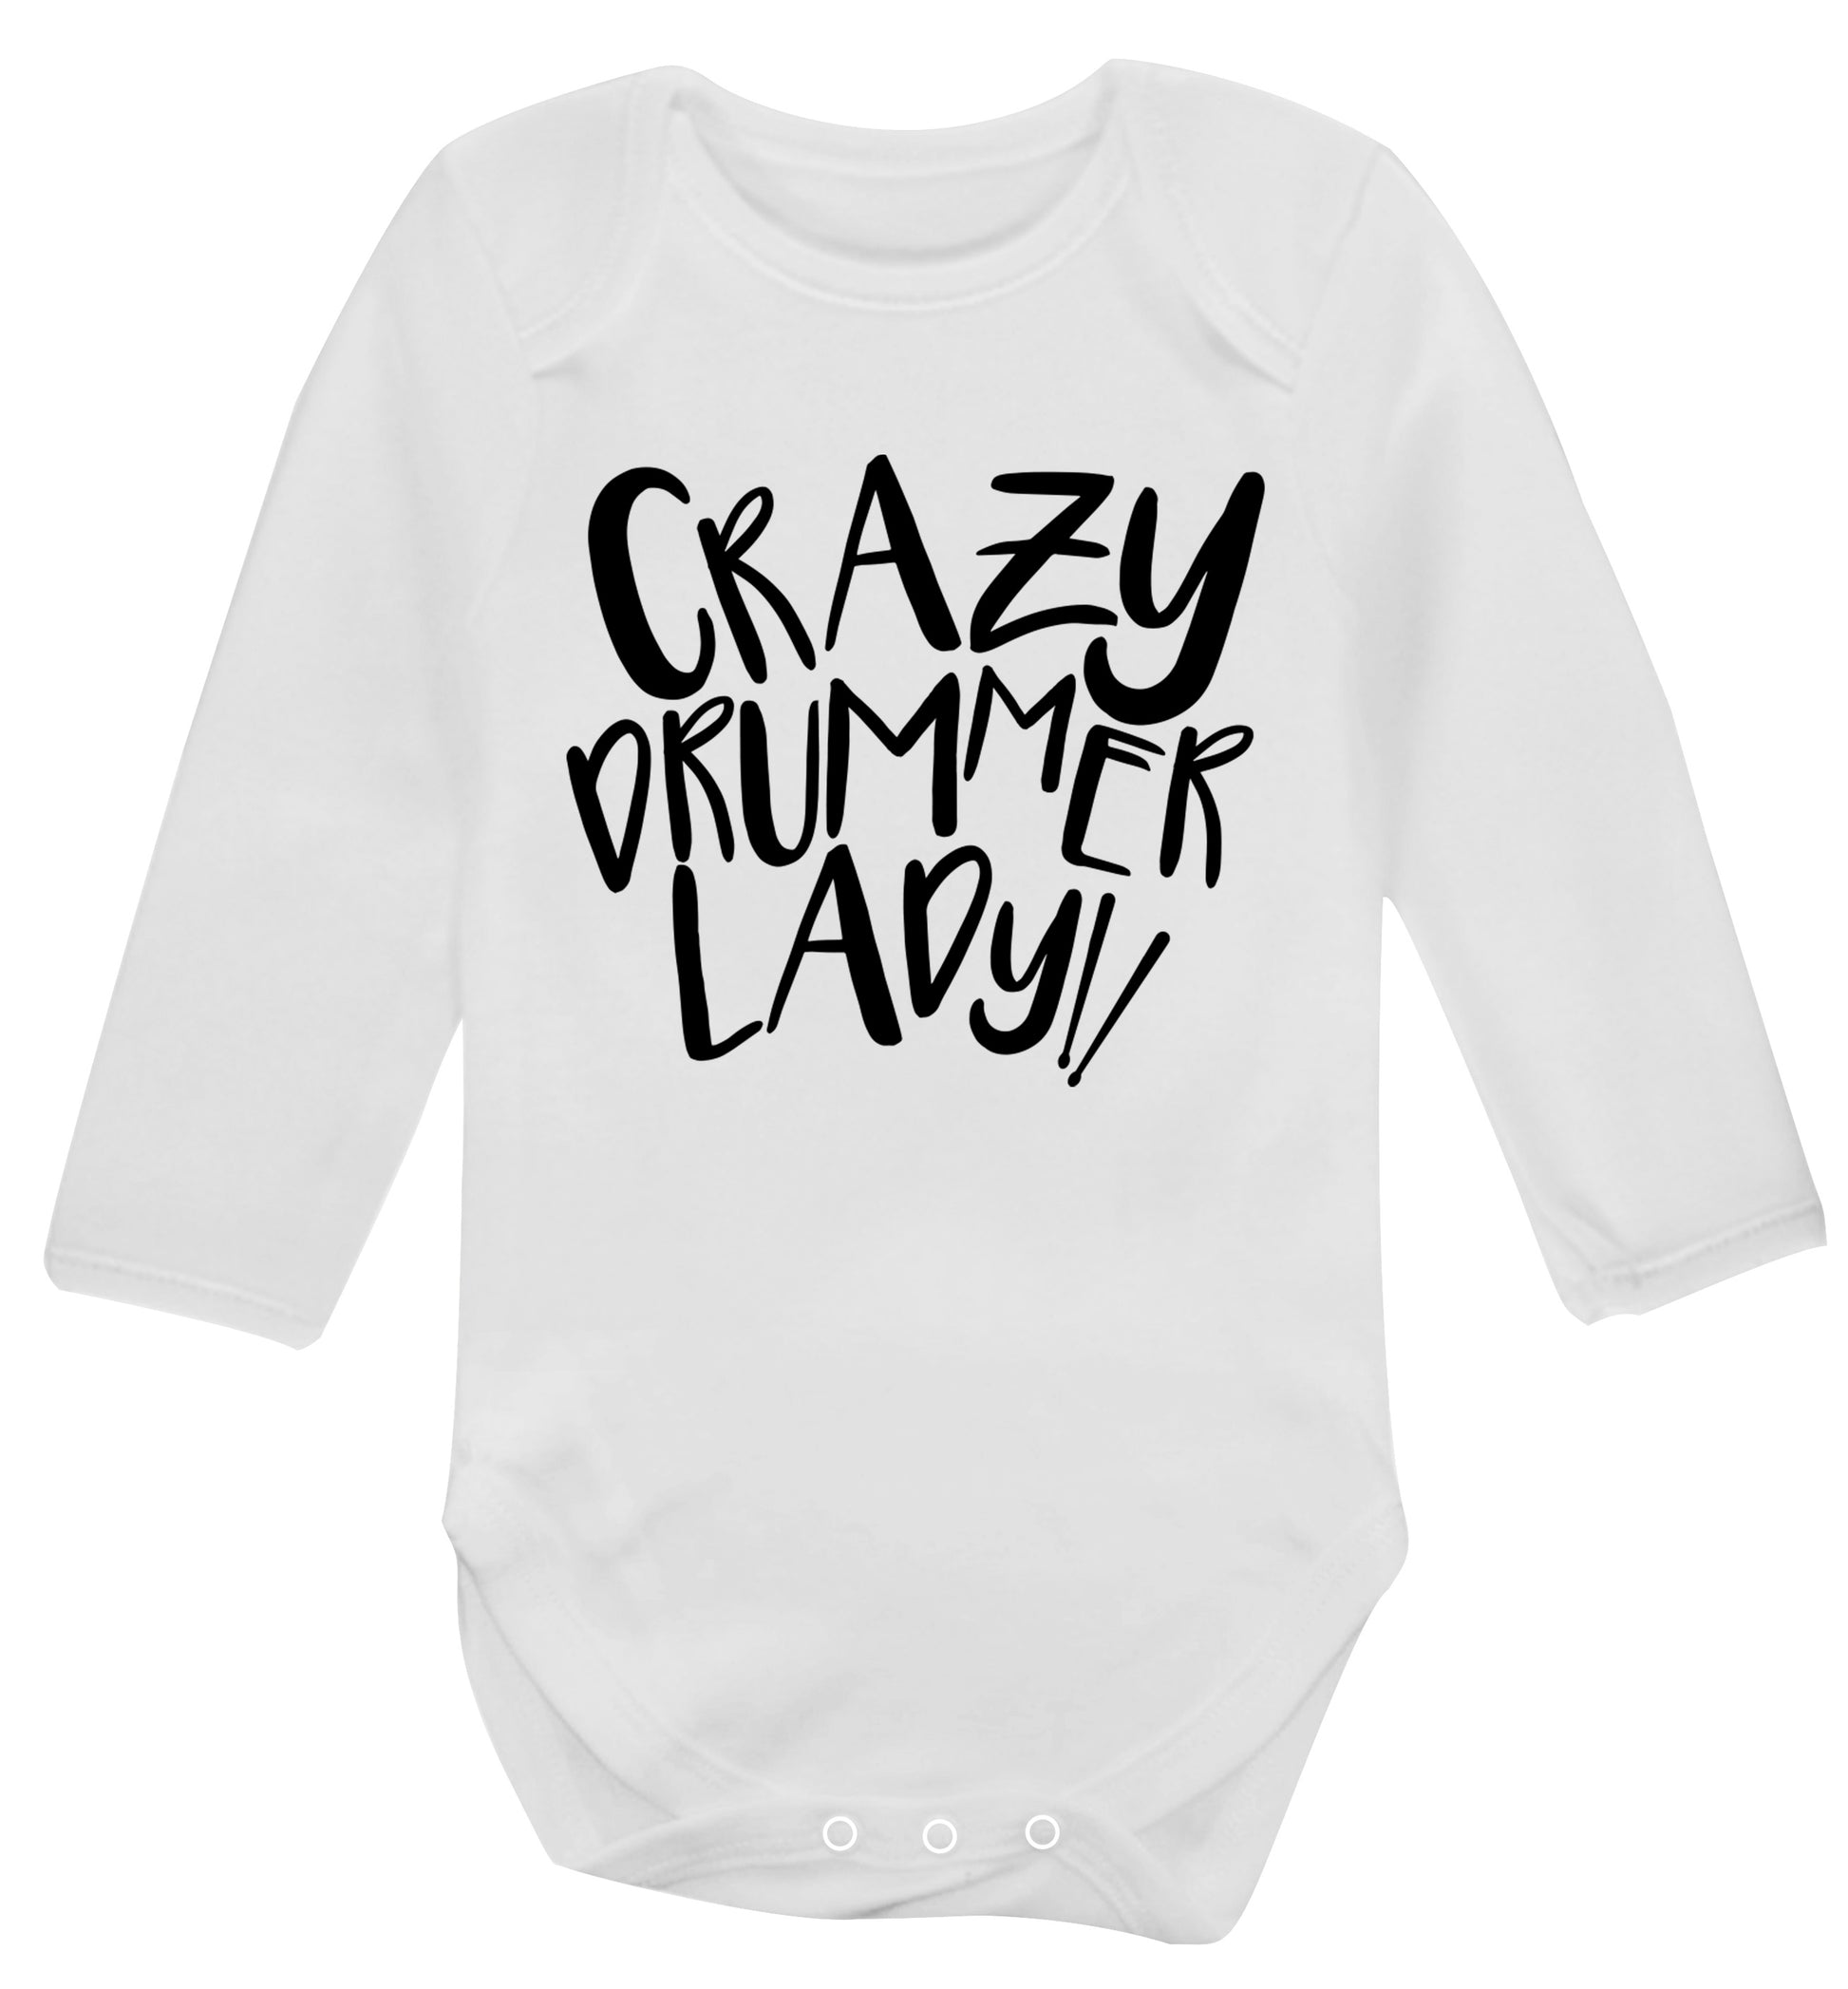 Crazy drummer lady Baby Vest long sleeved white 6-12 months